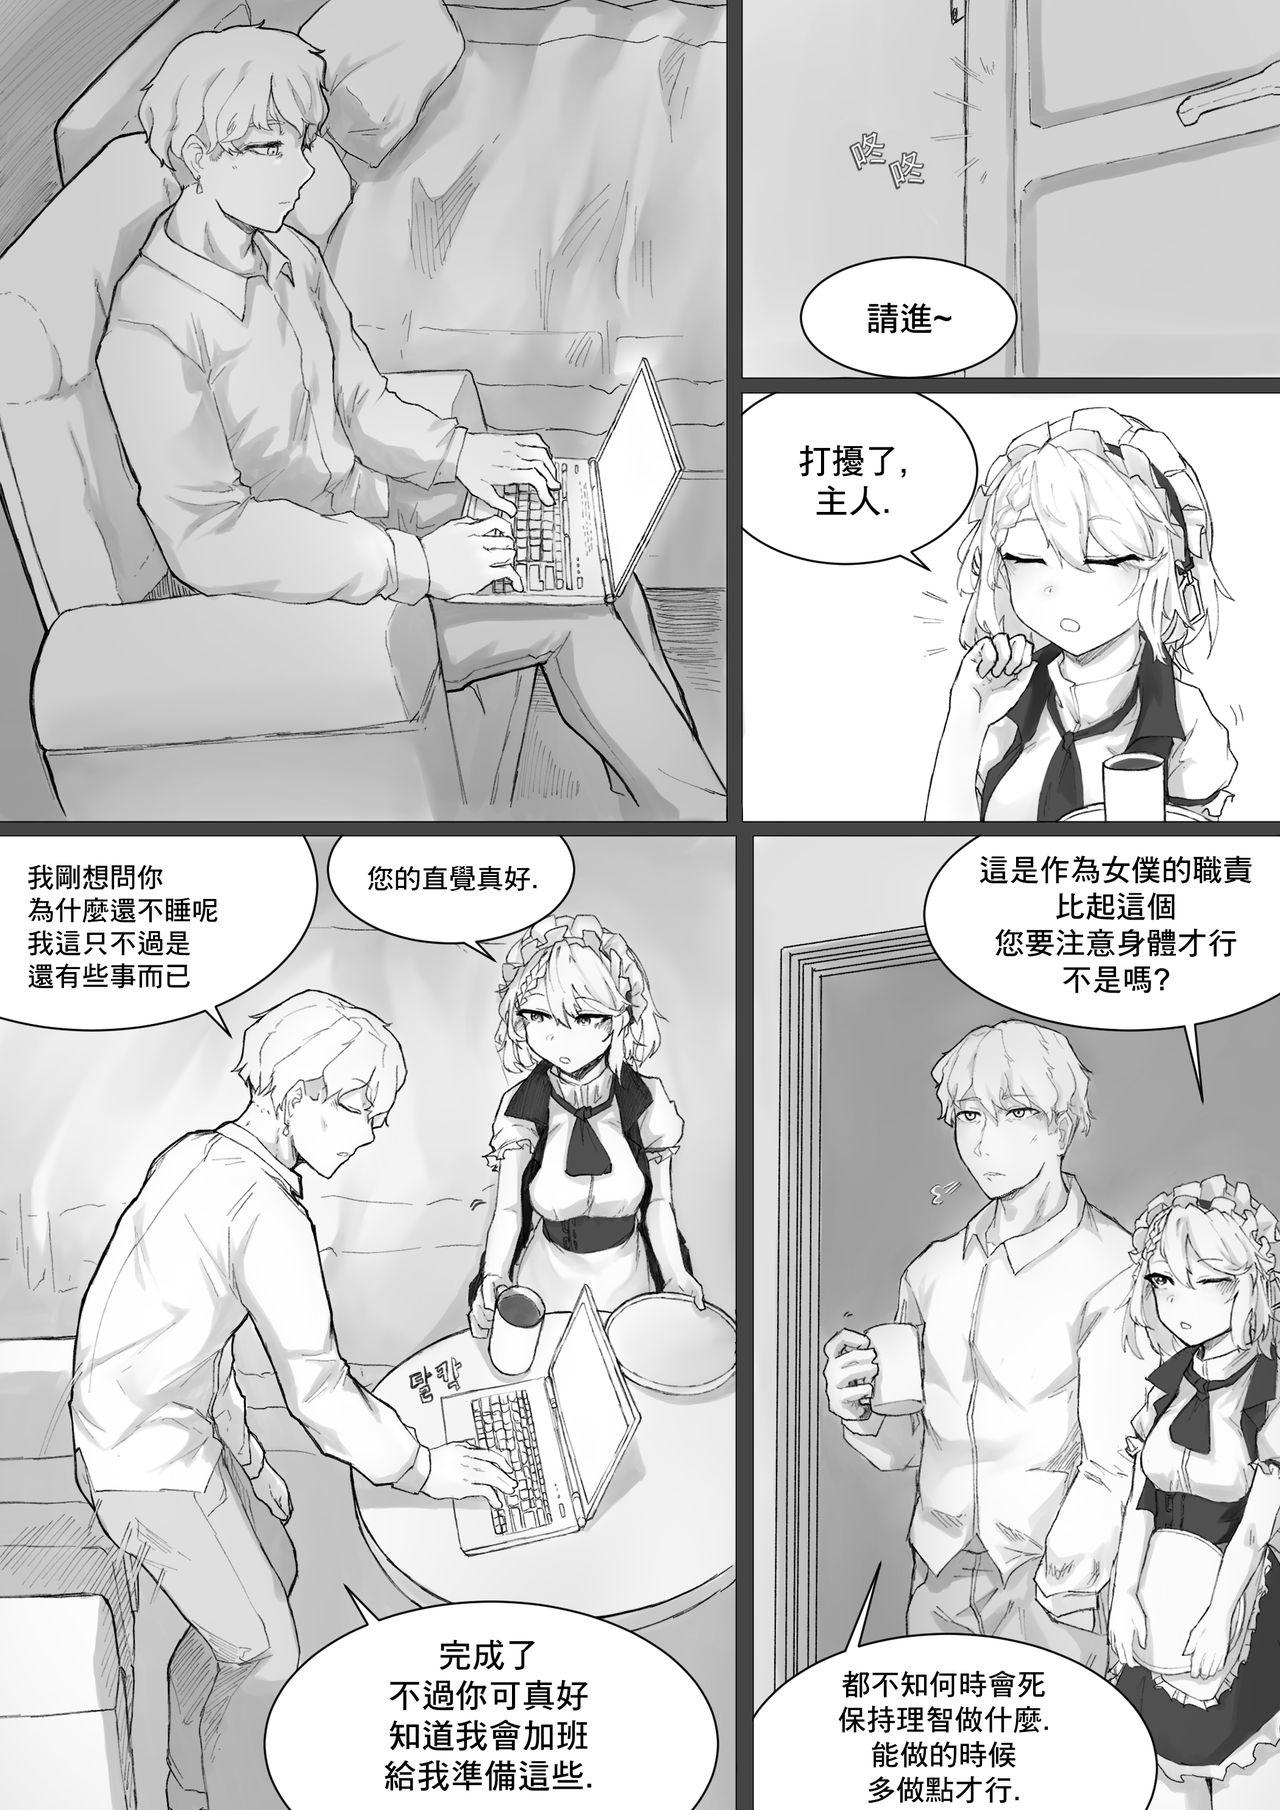 Mamada How To Use G36 - Girls frontline Large - Page 4